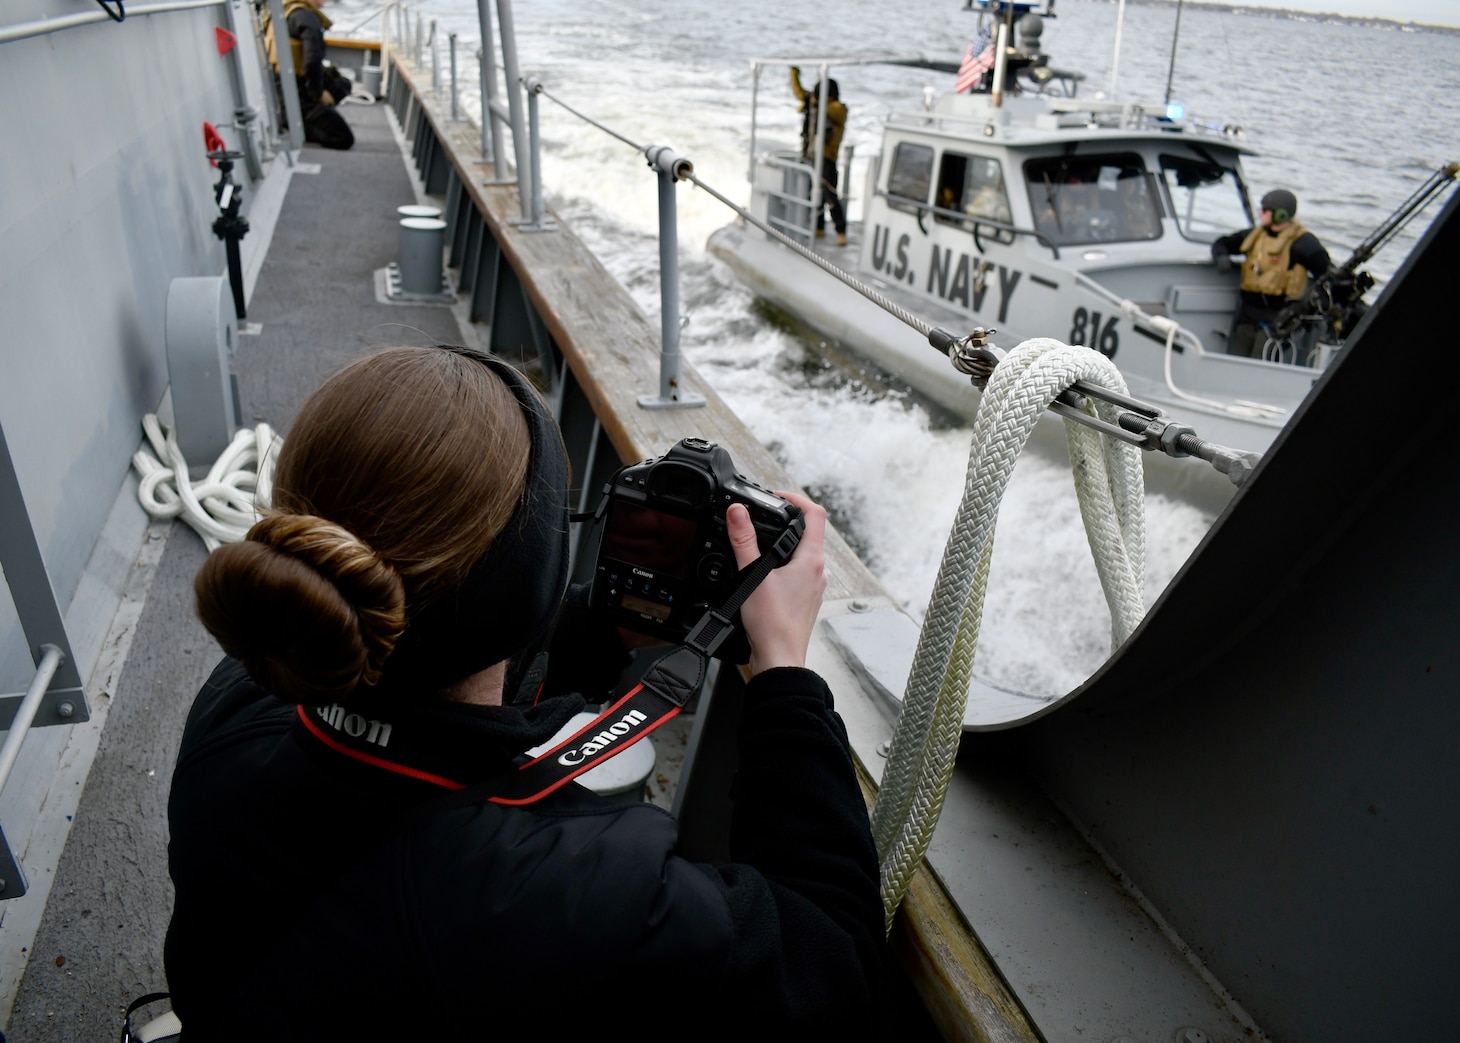 ANNAPOLIS, Maryland (March 26, 2024) - Mass Communication Specialist 1st Class Lorenzo Burleson of the Navy Reserve Chief of Information Office (NR-CHINFO) unit performs Operational Task Visual Information (OPTASK VI) training aboard a U.S. Naval Academy Yard Patrol craft. OPTASK VI is a no-fail mission designed to capture and document unsafe, unprofessional, or nefarious activities at sea, on land, and in the air.

The NR-CHINFO Sailors coordinated with the Naval Academy and Navy Reserve Maritime Expeditionary Security Squadron EIGHT as part of Train the Force efforts to prepare them for mobilization and war fighting assignments.